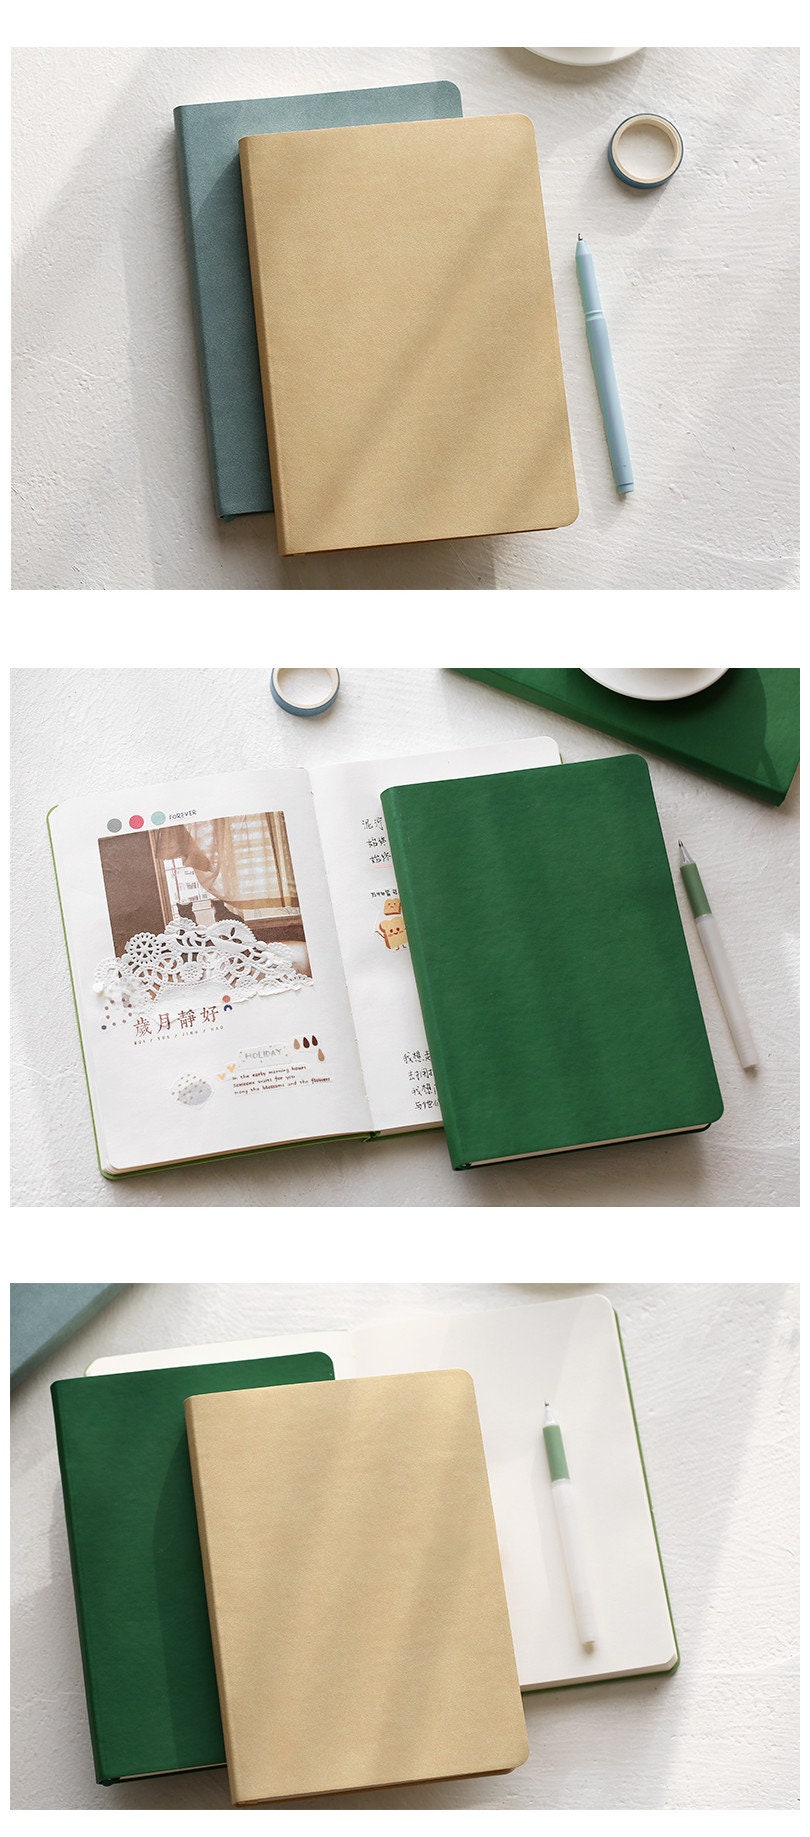 A5 PU Cover Journal Notebook. Blank Inner Page Green Pink Blue Cover Book Modern Dairy Simple Notepad Scrapbook Sketchbook 7 colors 272P